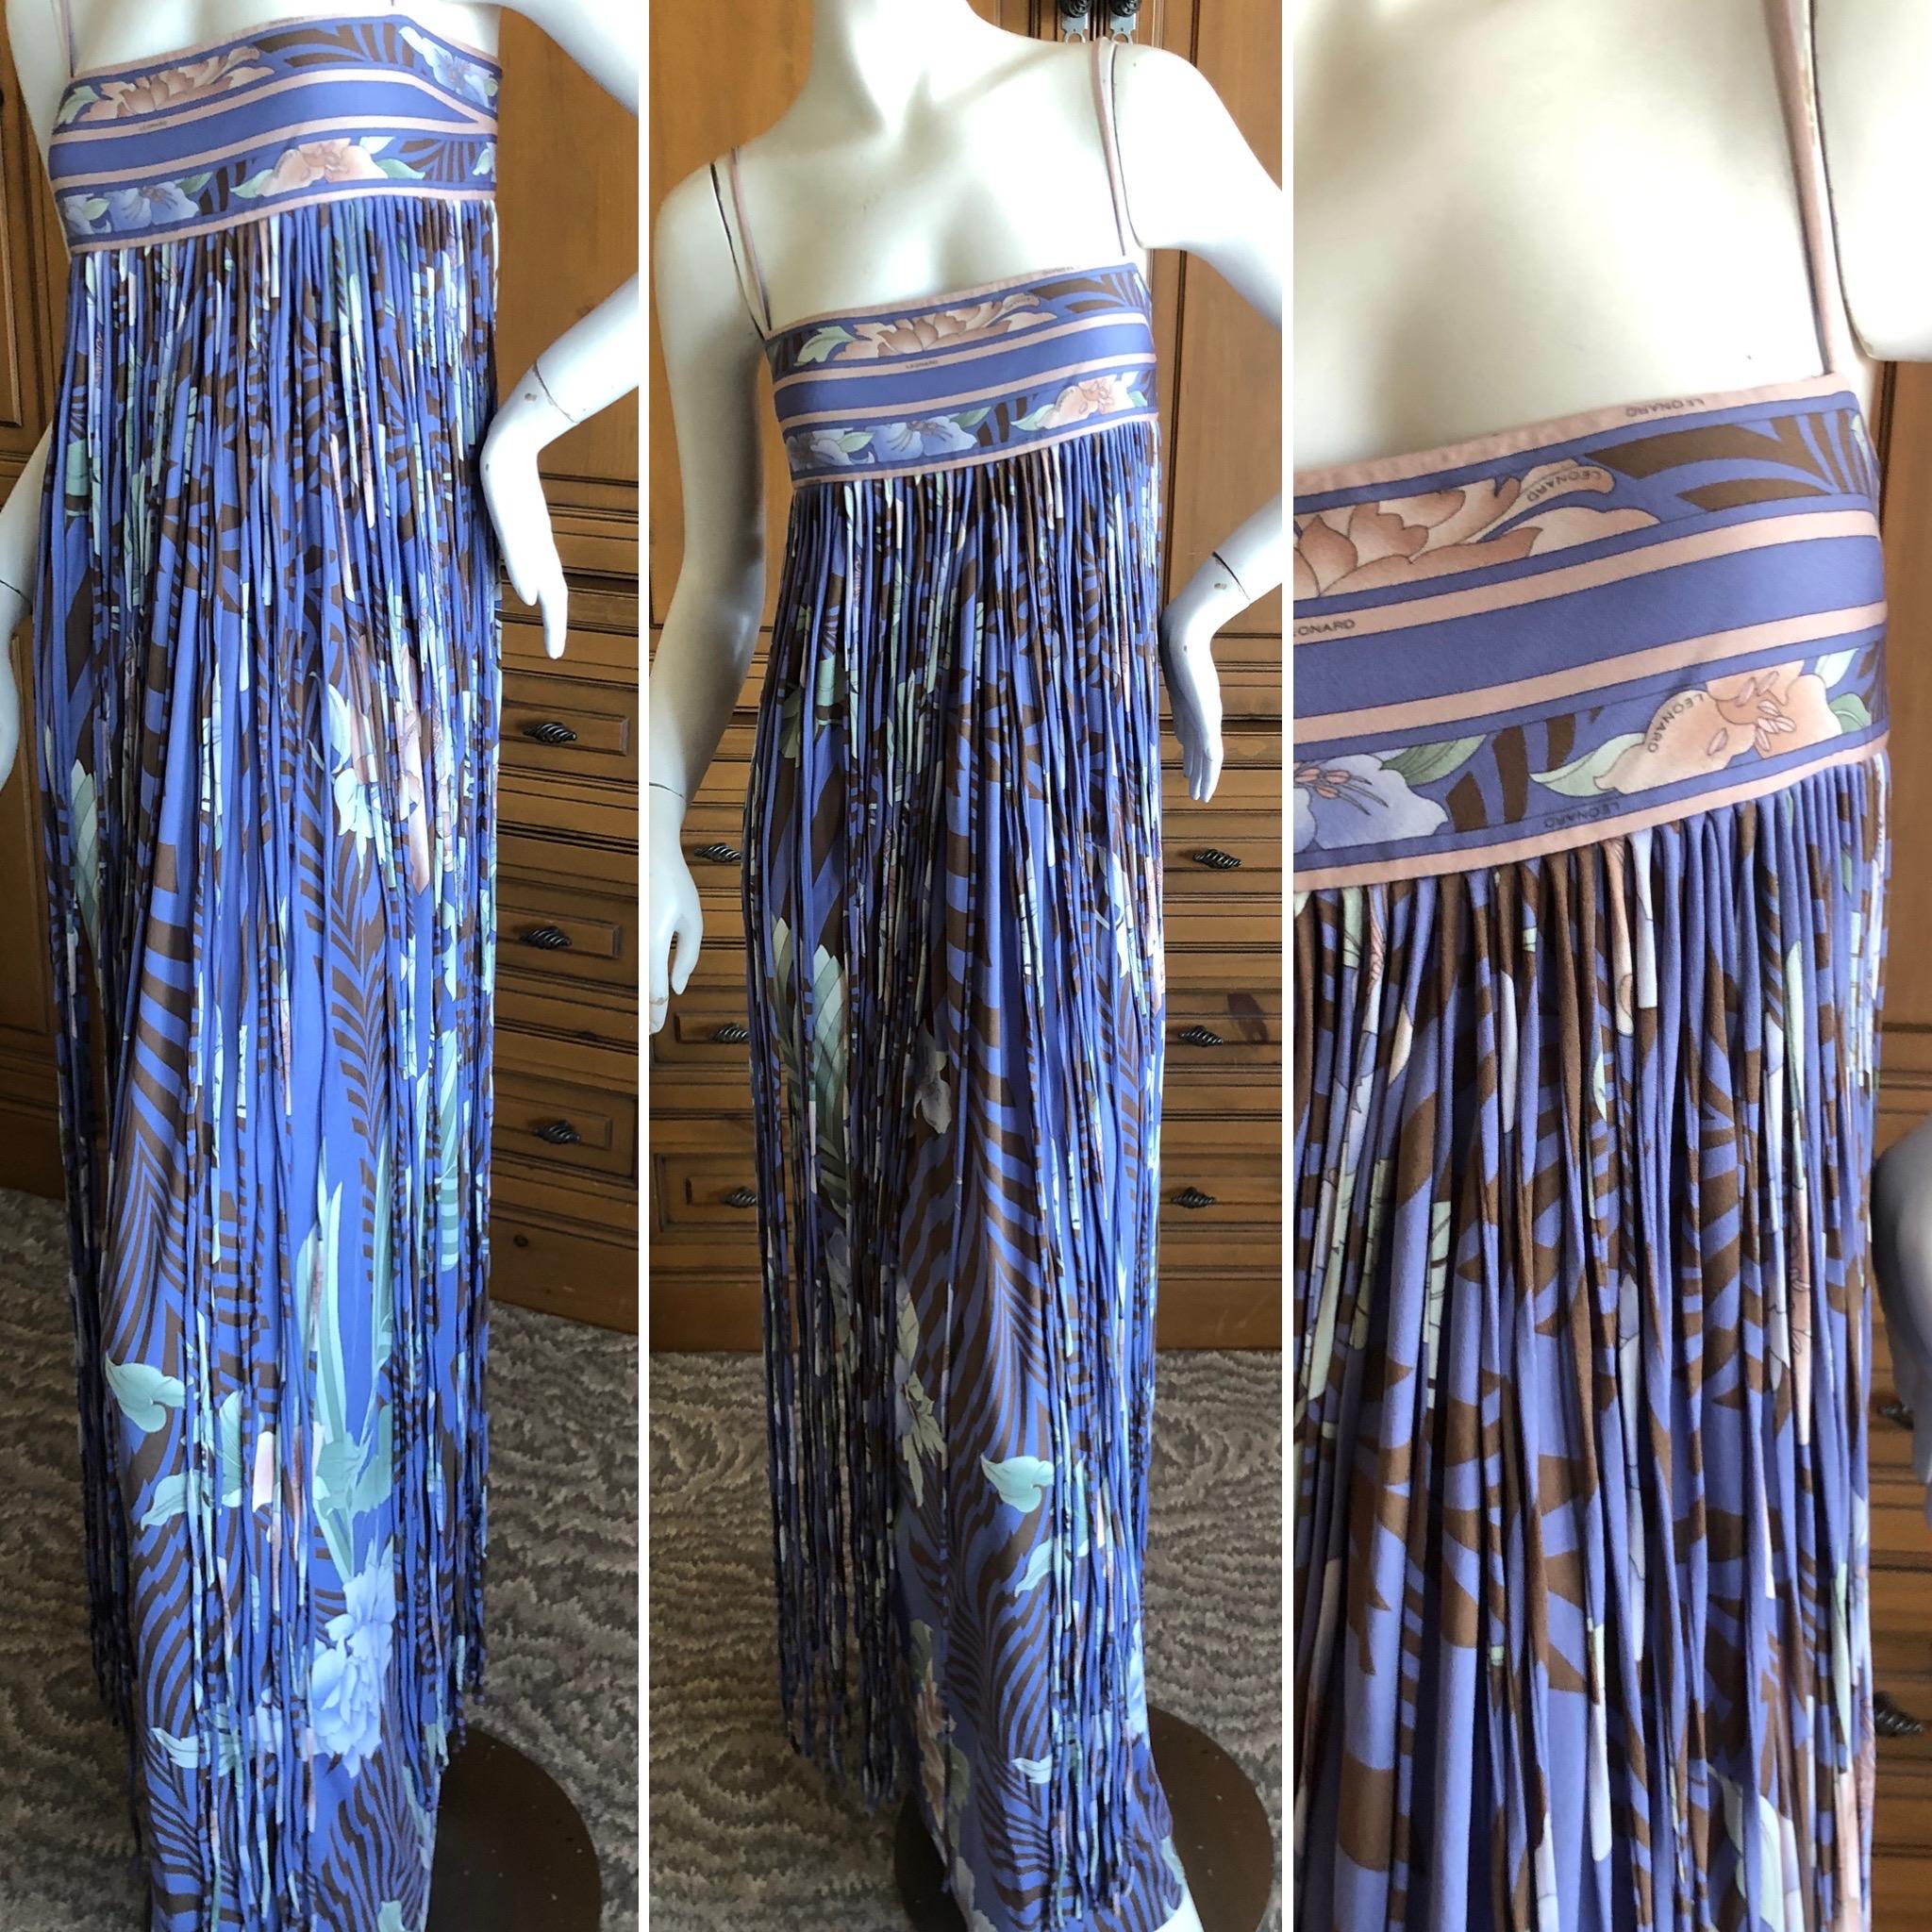 Leonard Paris Silk Jersey Unusual Vintage Long Evening Dress with Fringe.
This is so pretty, the front embellished with floor length fringe created in the same silk jersey formed in to cord fringe.
Leonard Paris was a contemporary of Pucci, both